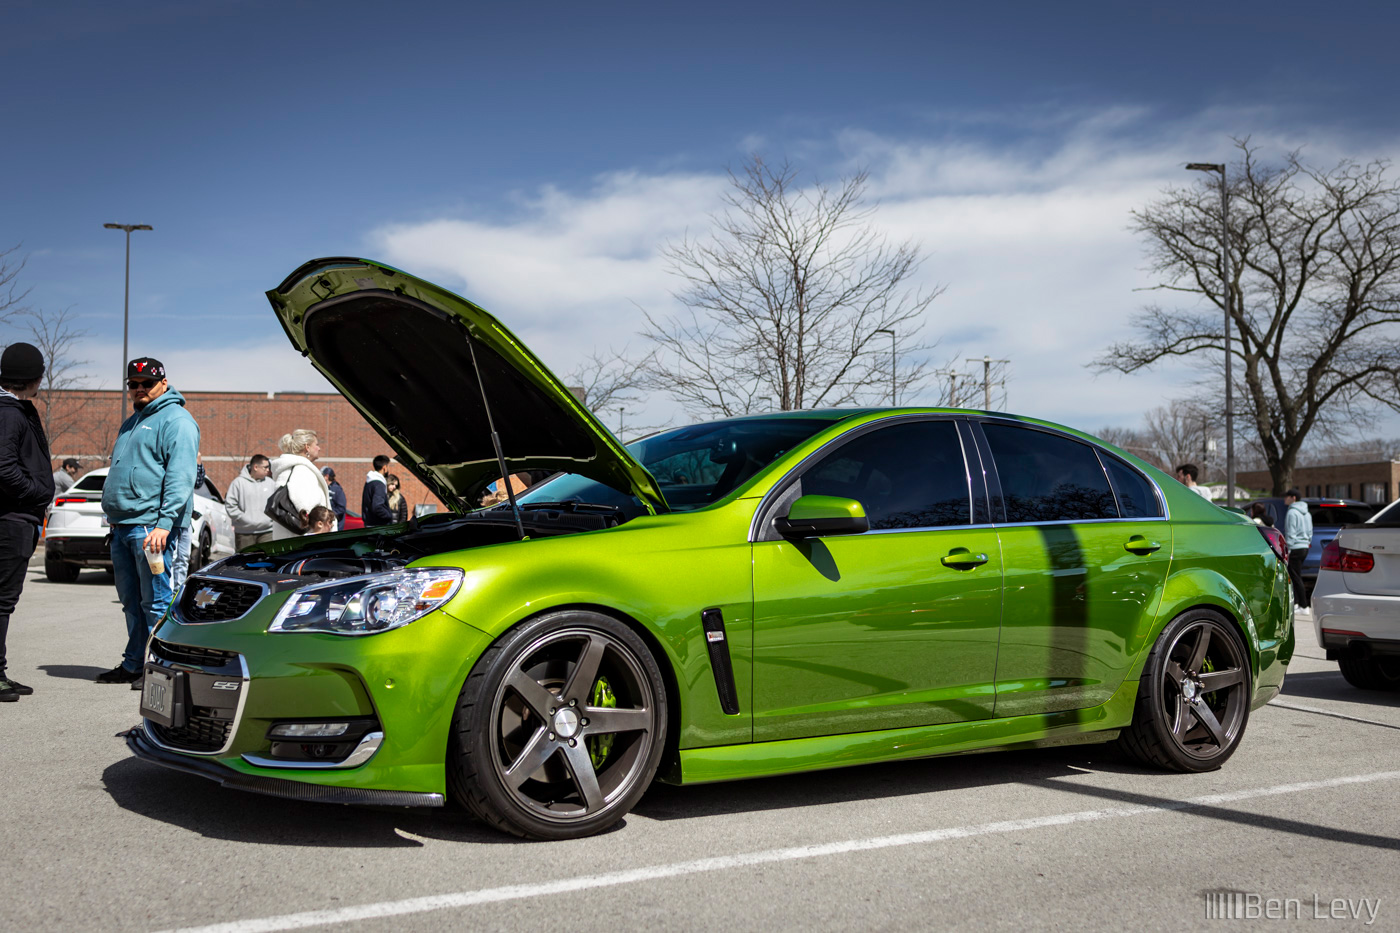 Green Chevrolet SS Sedan at Cars and Coffee